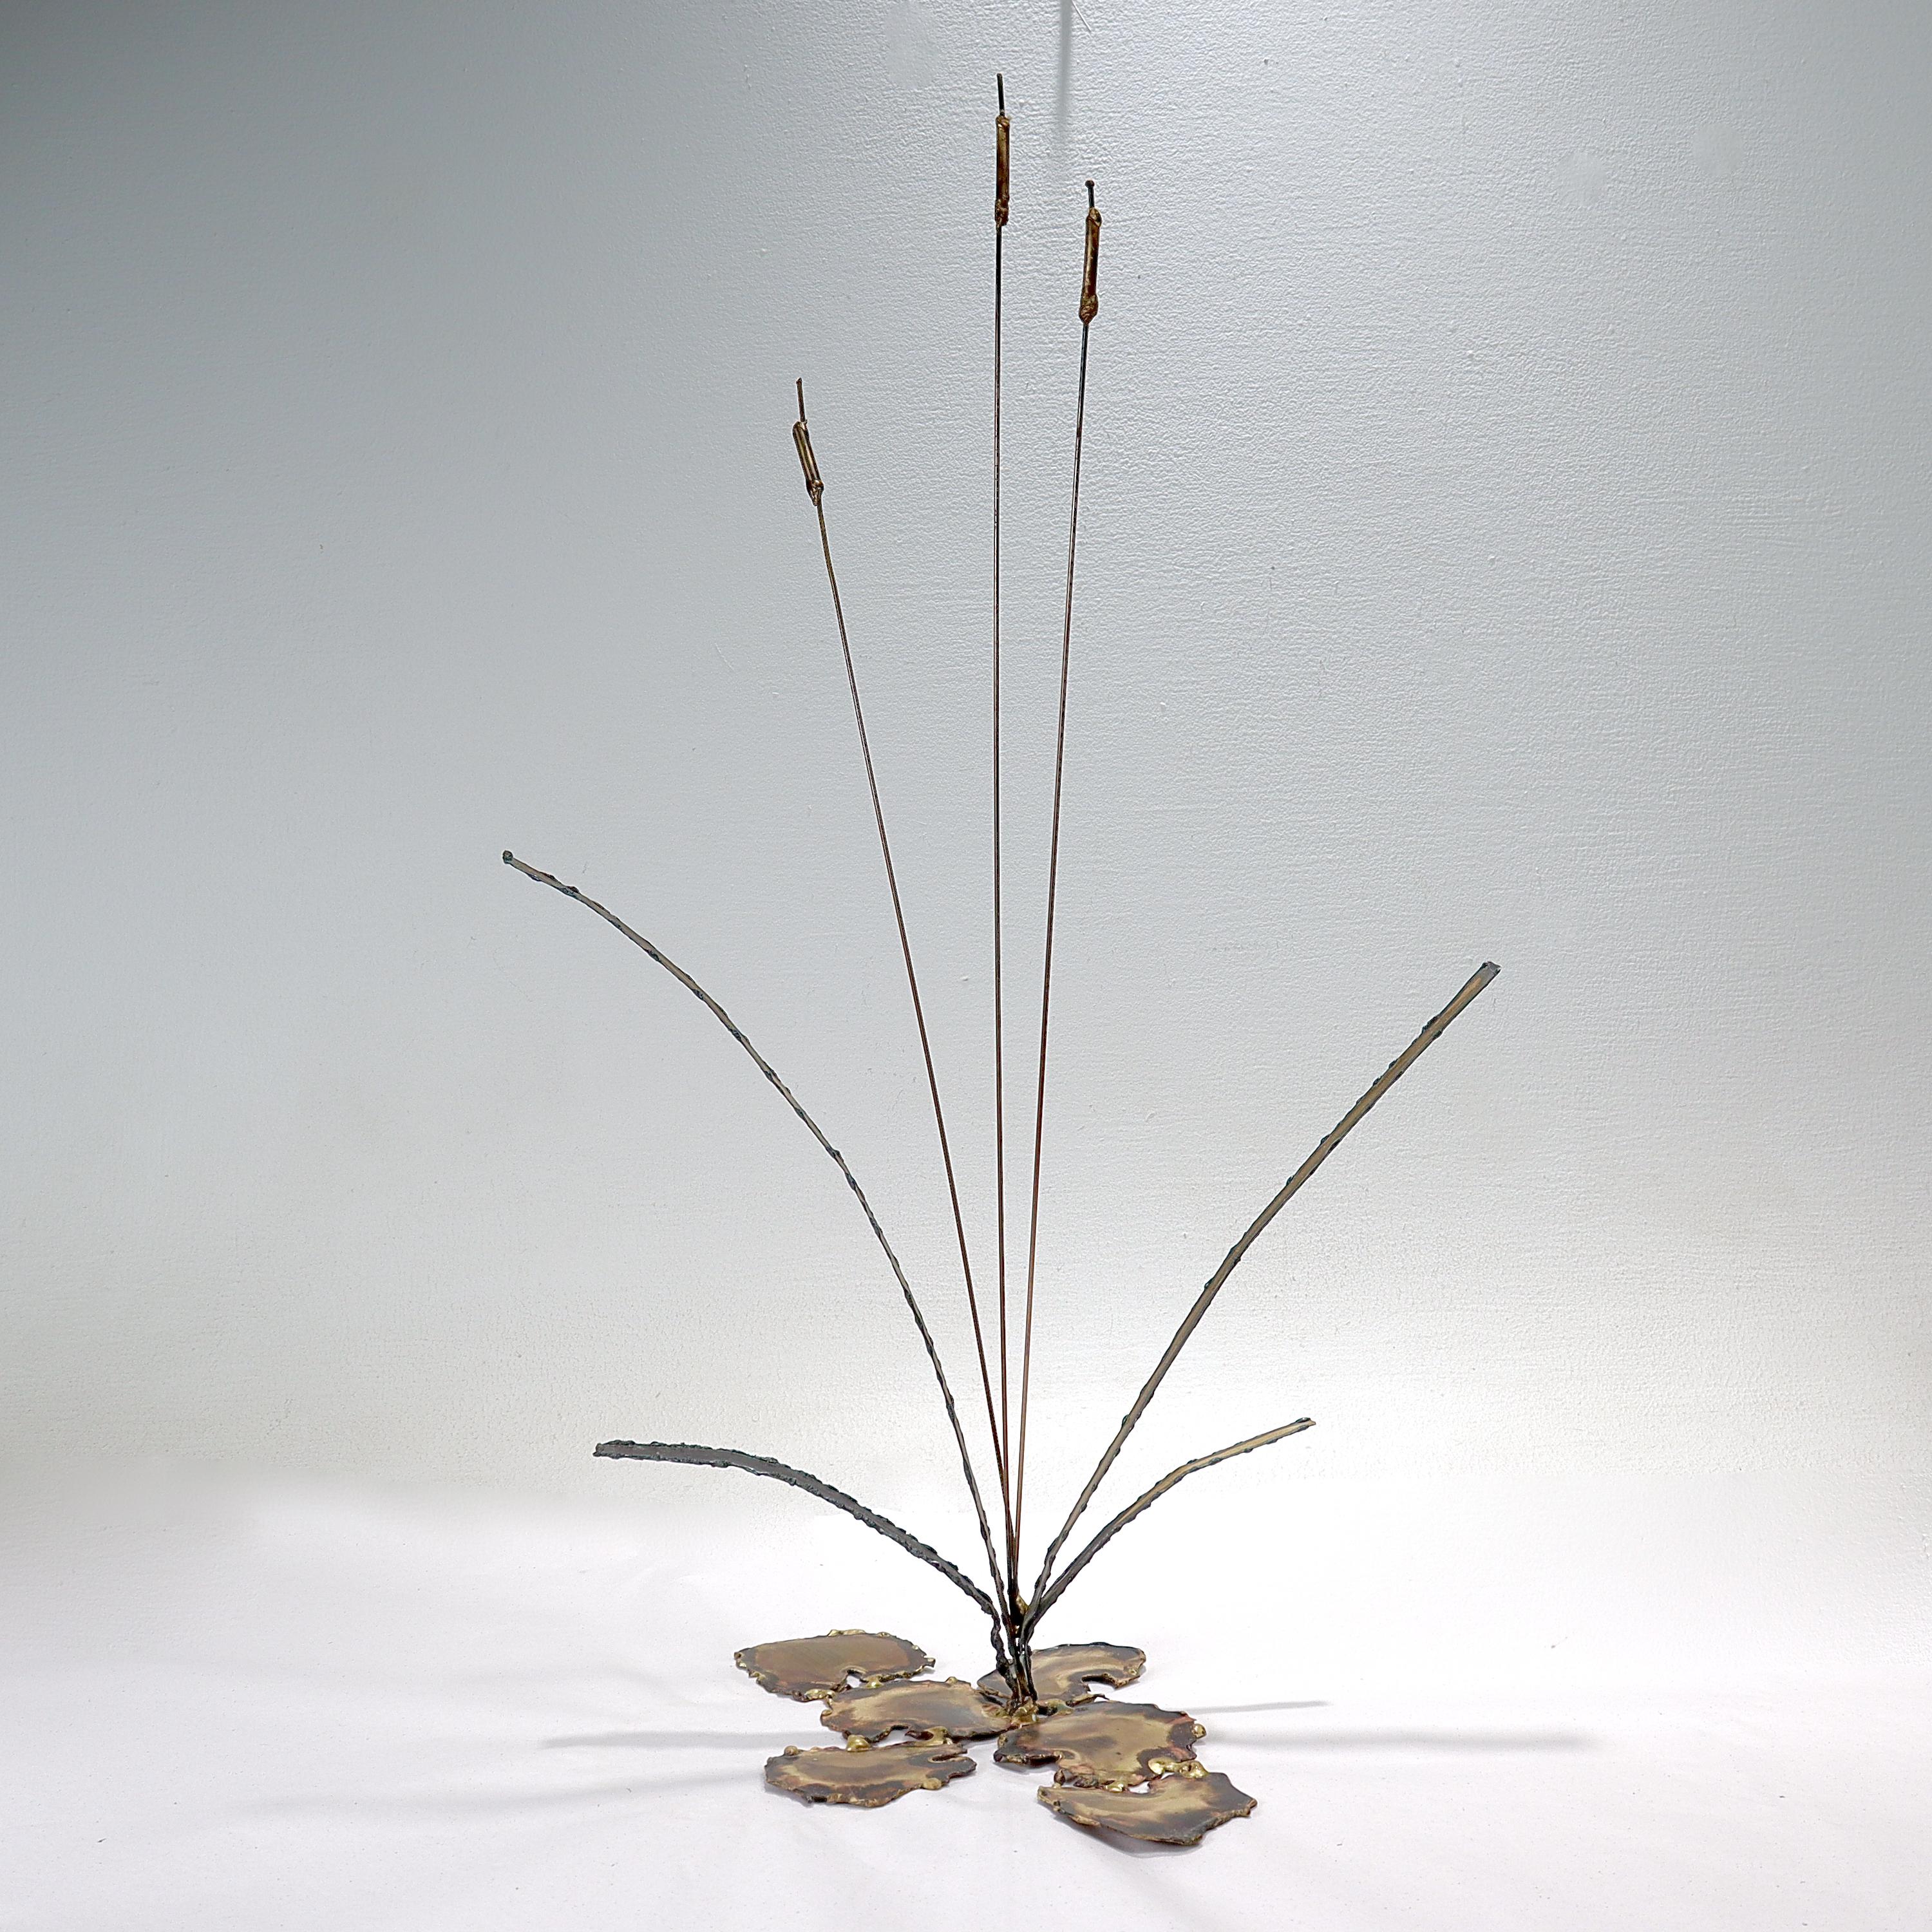 A fine vintage Mid-Century Modern mixed metals sculpture.

In the style of Curtis Jere.

In soldered brass & copper. 

In the form of cattails surrounded by lilypads(?).

Simply a great Mid-Century Modern sculpture!

Date:
Mid-20th